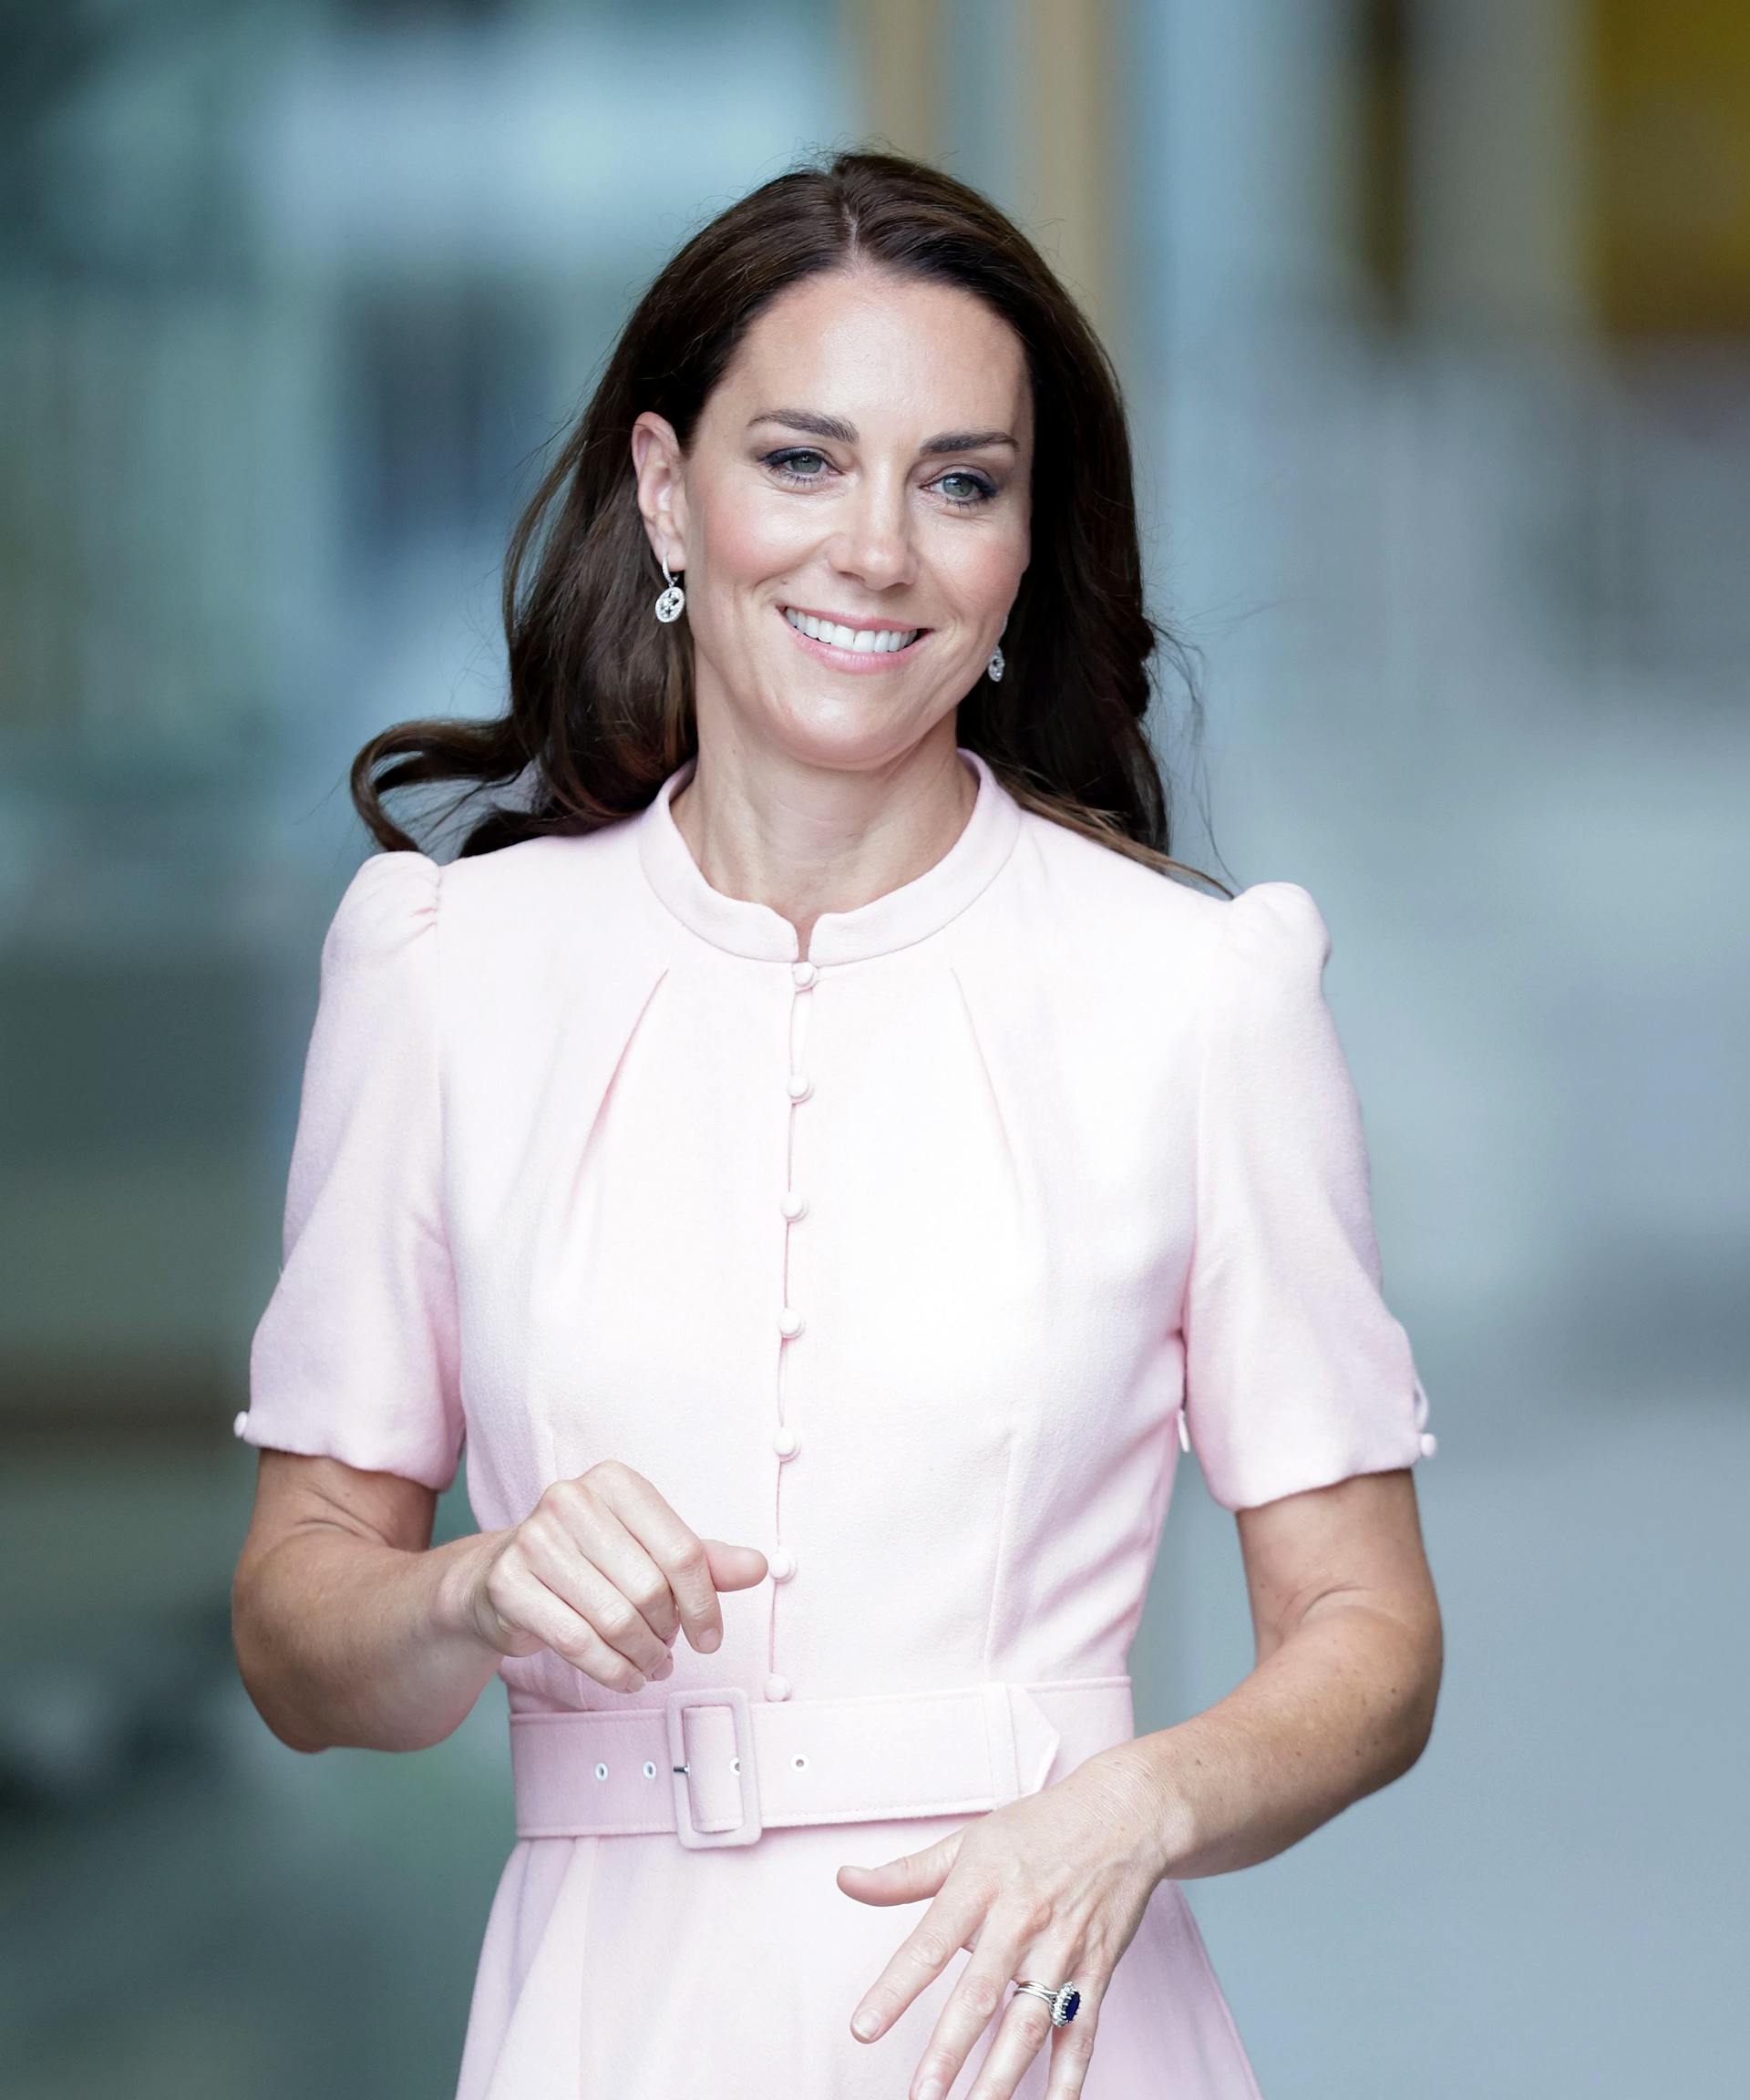 Shop All Of Kate Middleton’s Favorite Brands (Many Are More Affordable Than You Think)